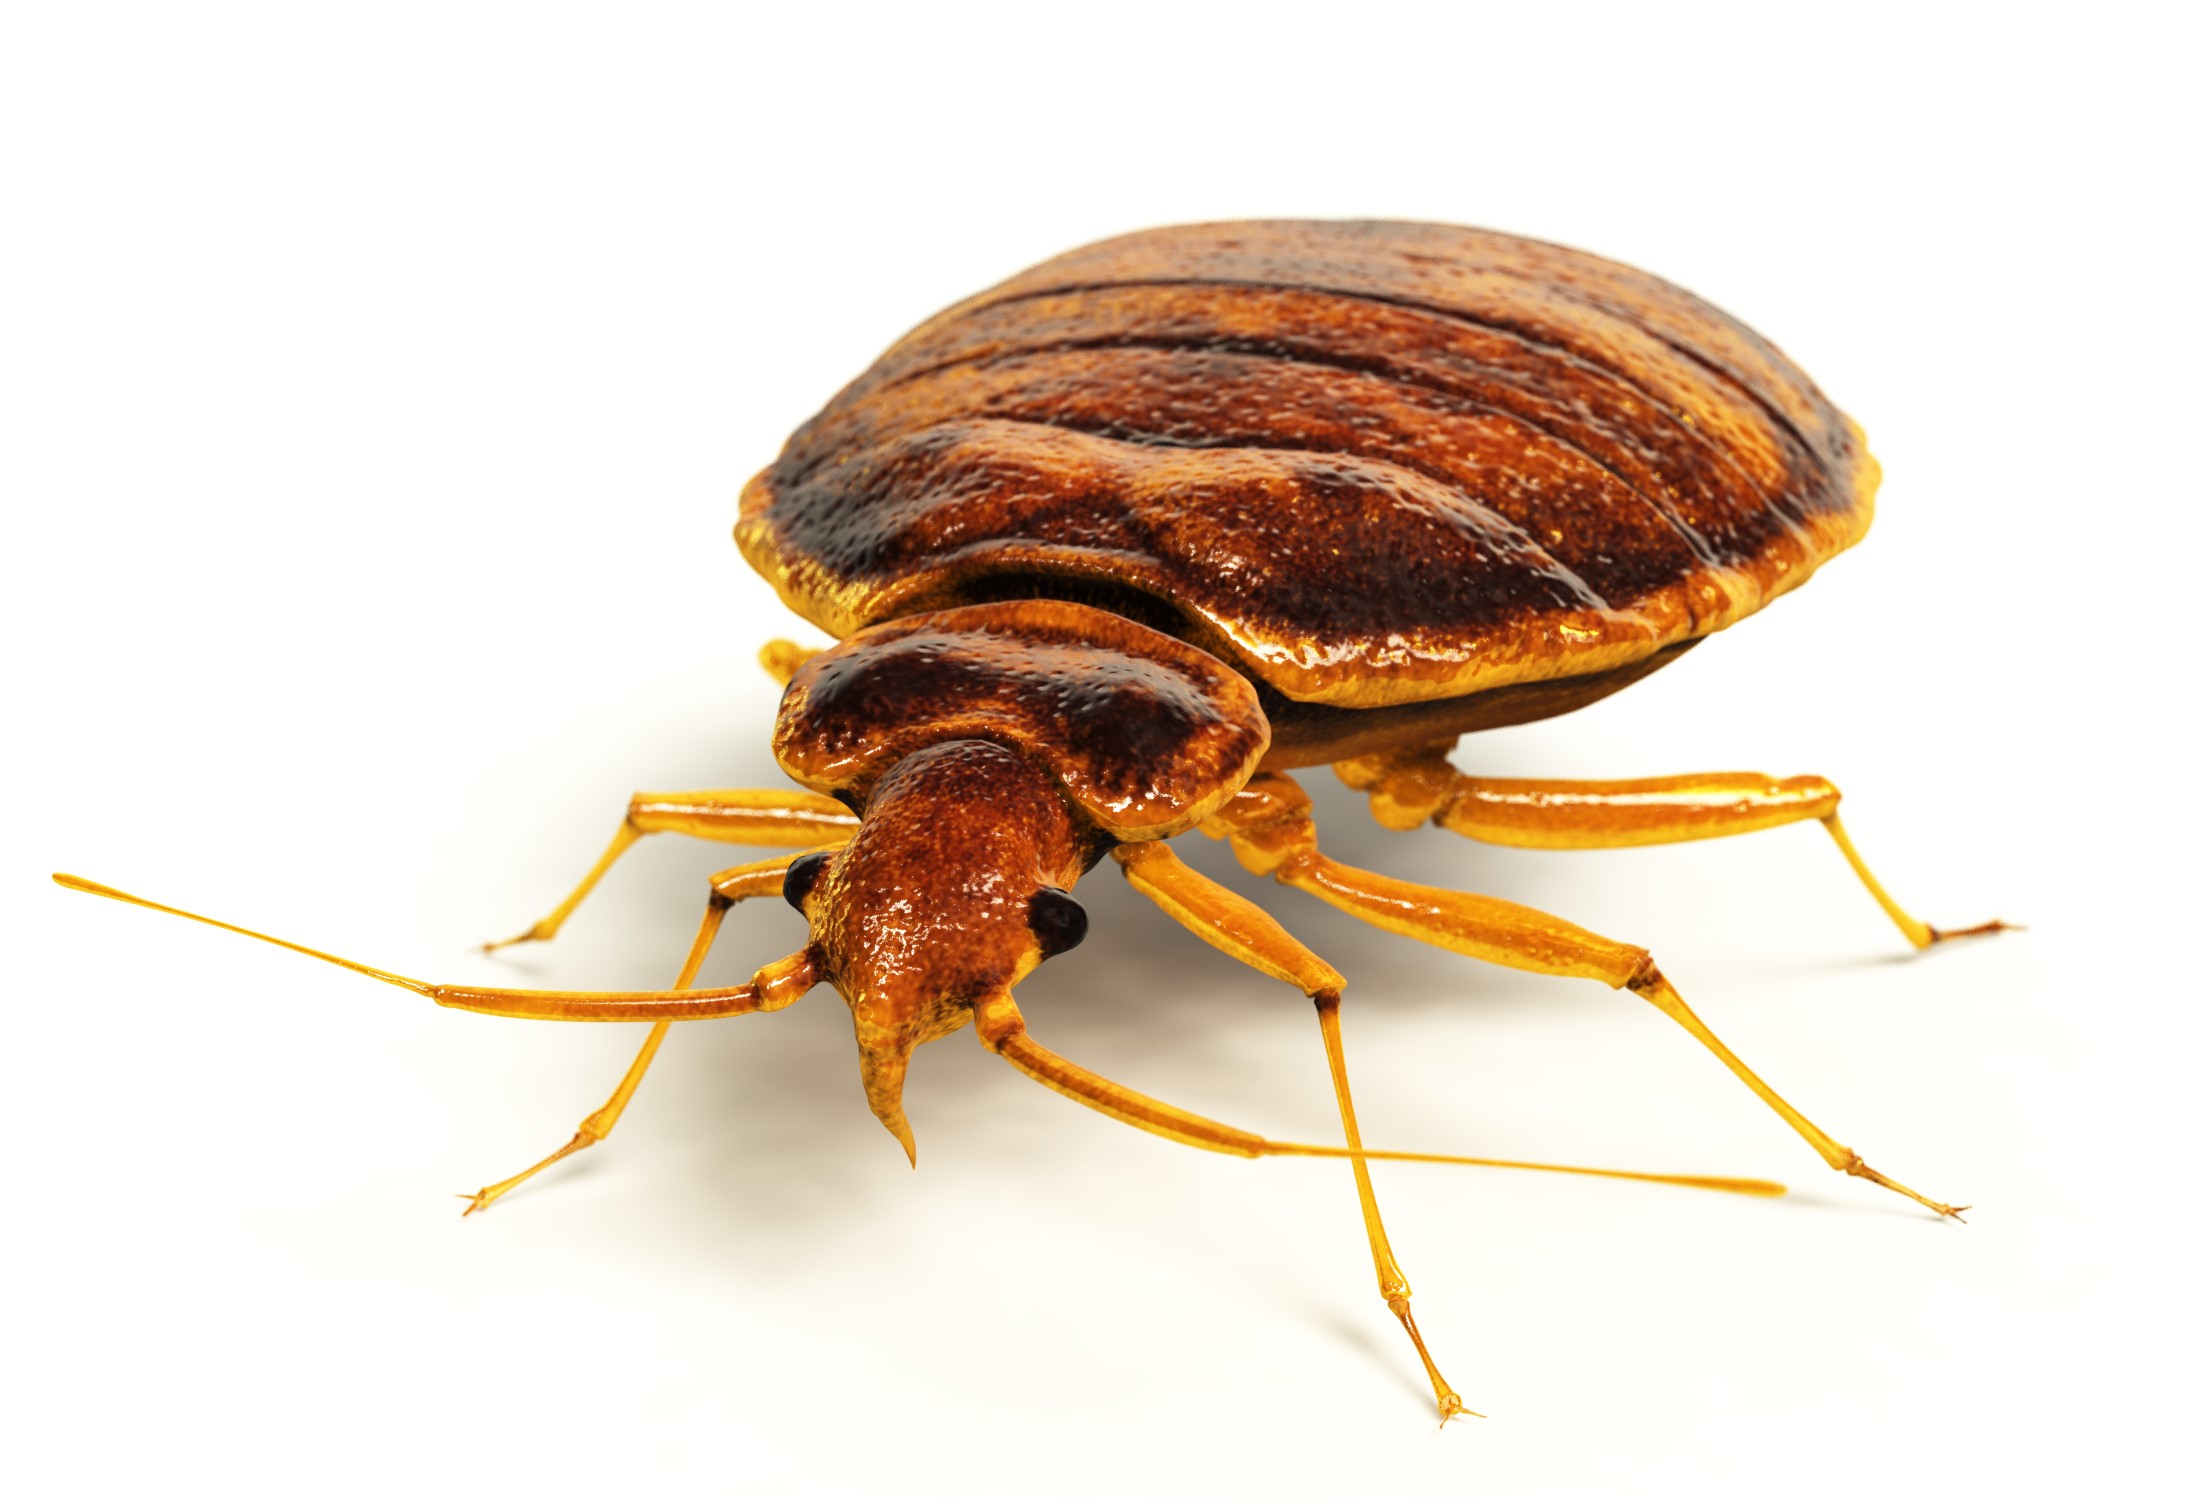 Image of a bed bug